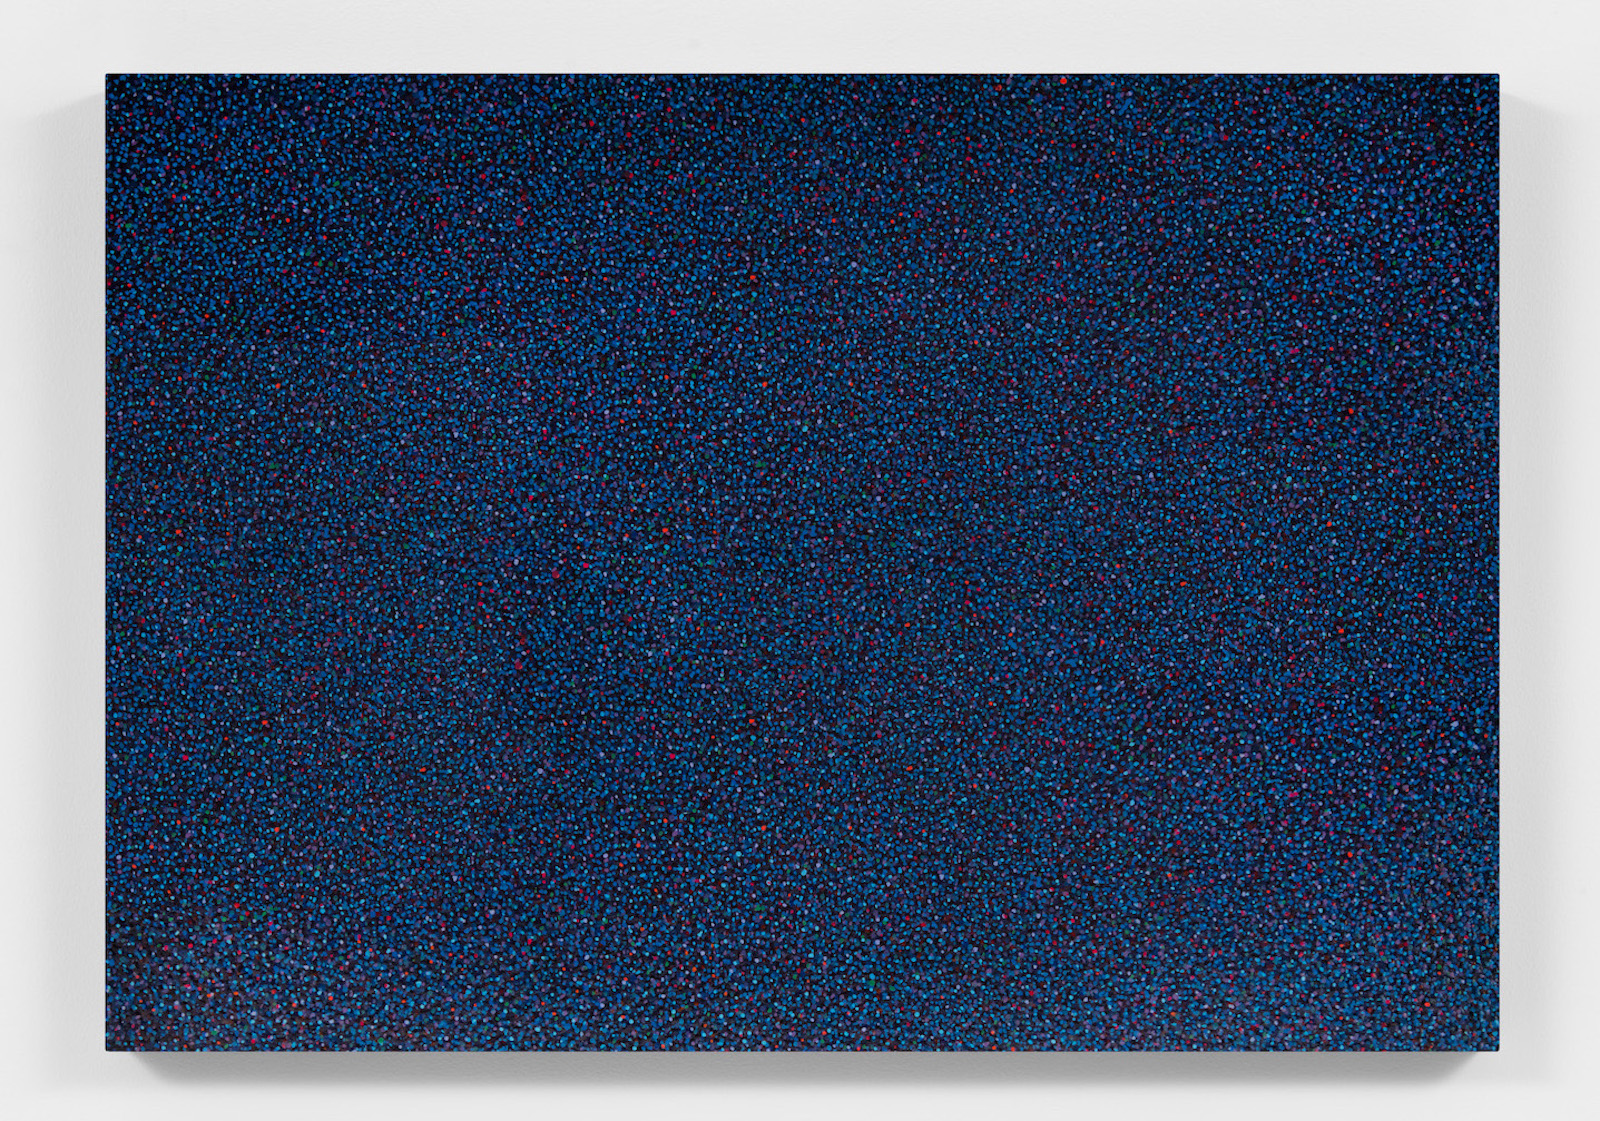 Untitled (Blue hour), 2021